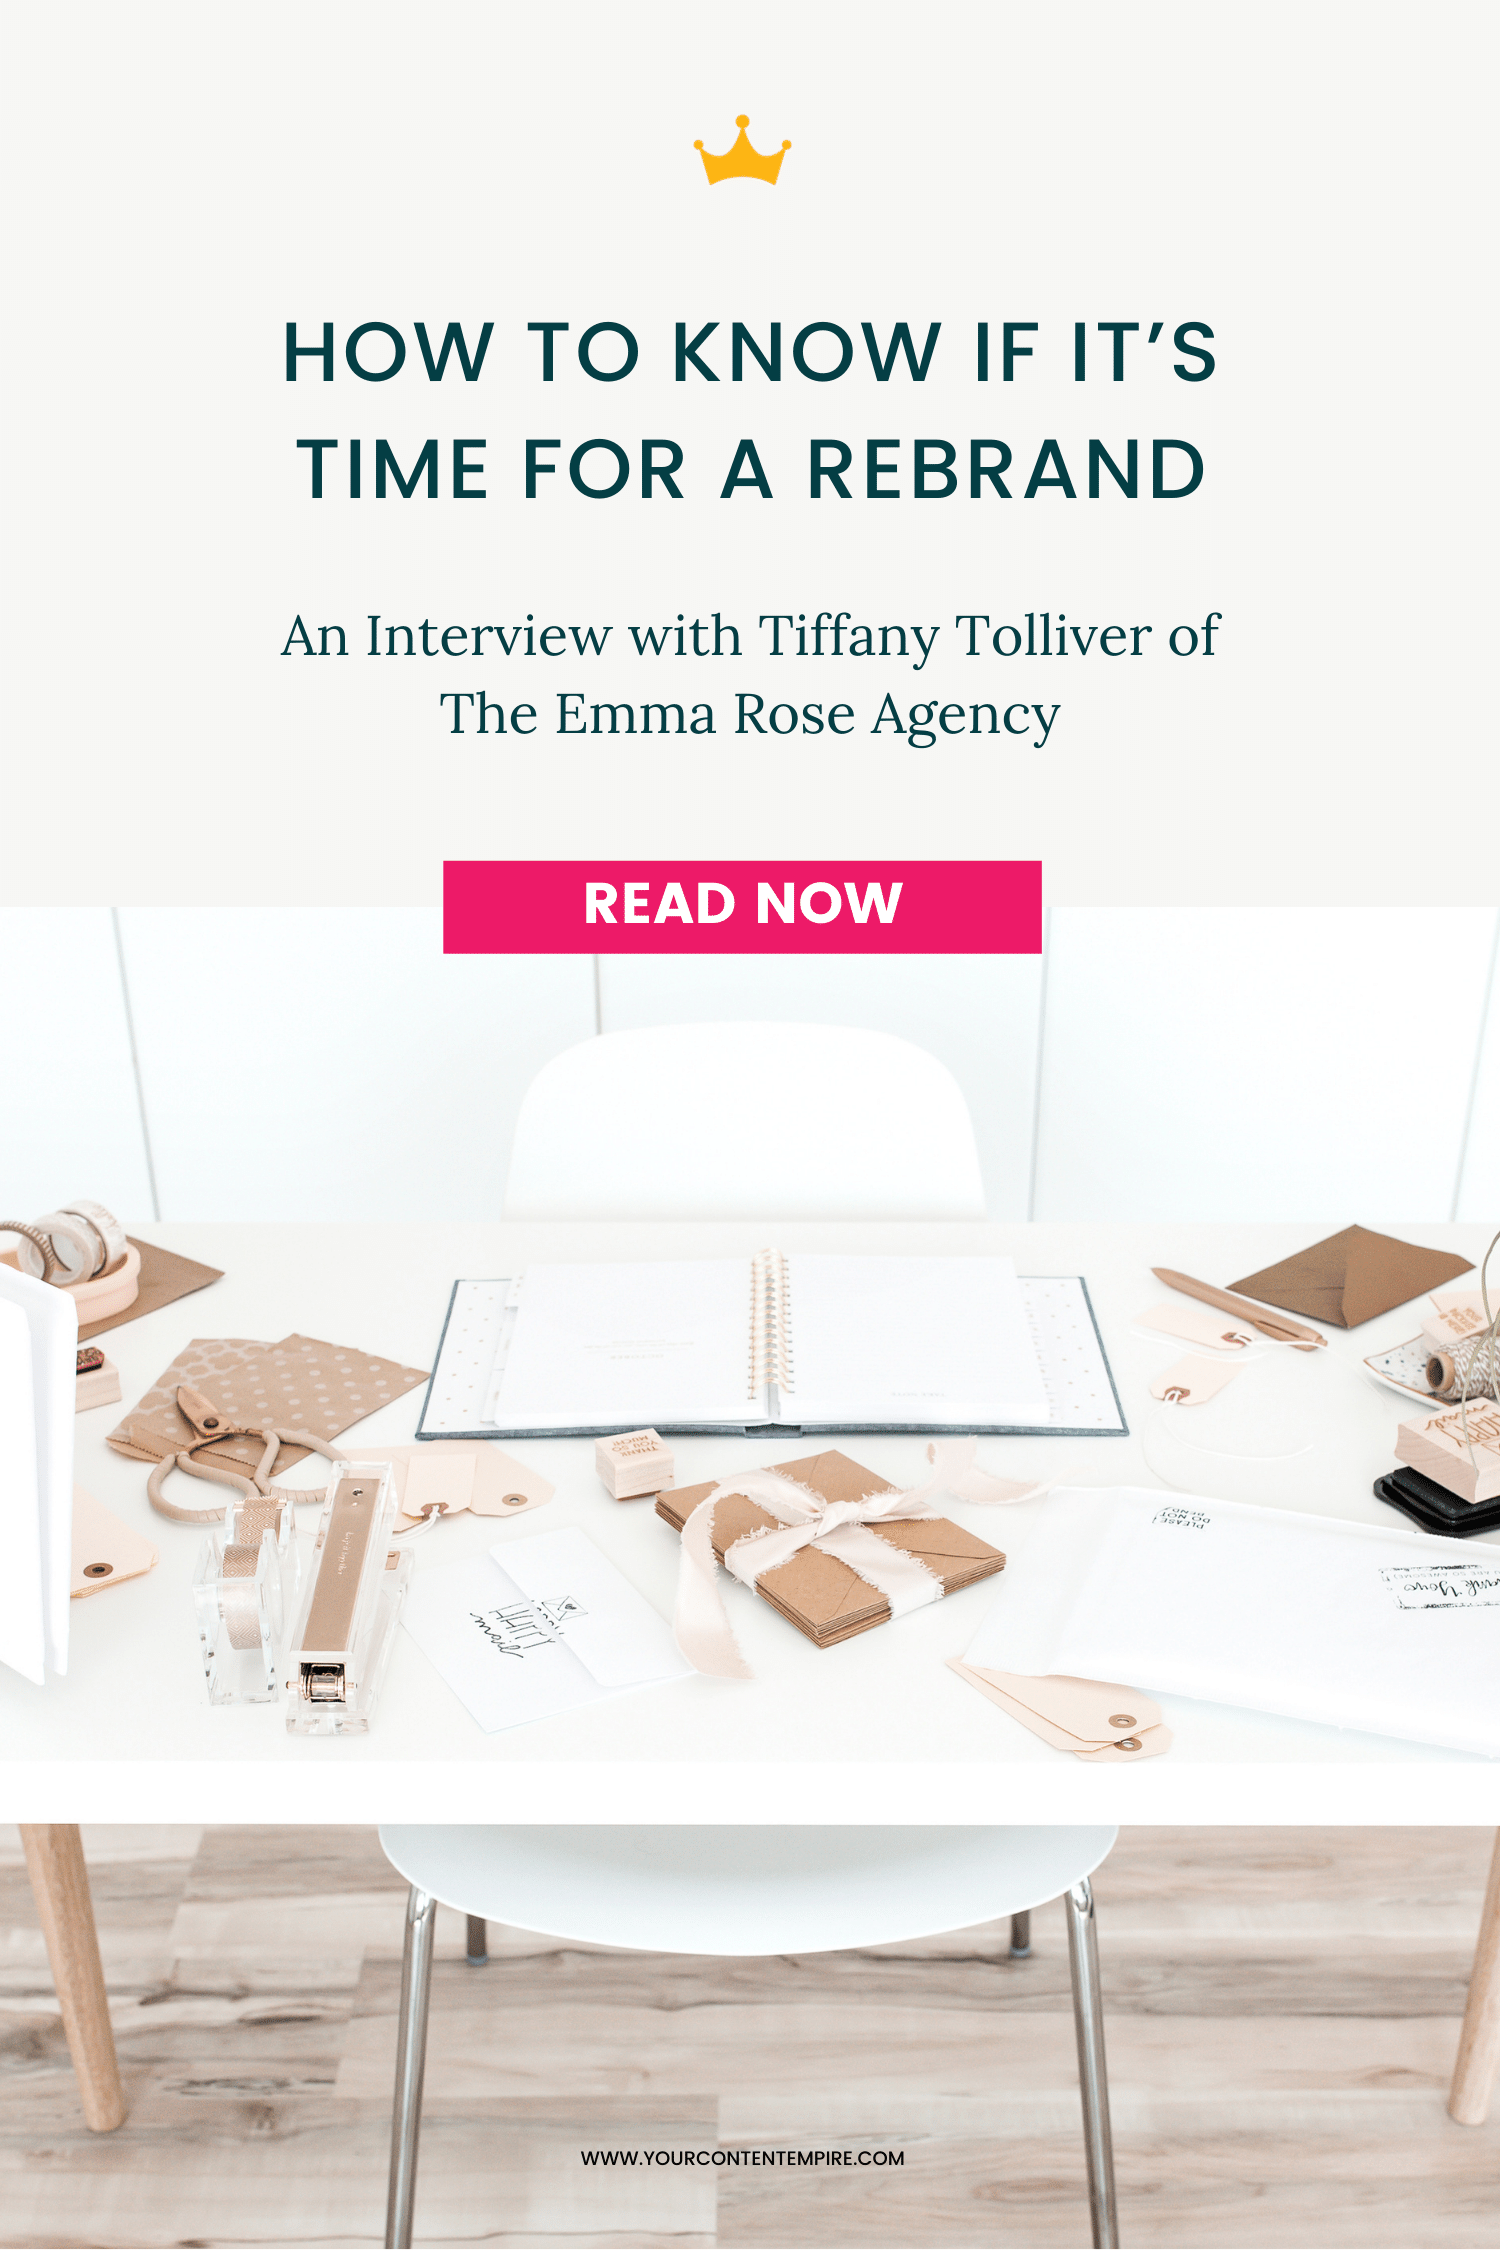 How to Know If It’s Time for a Rebrand